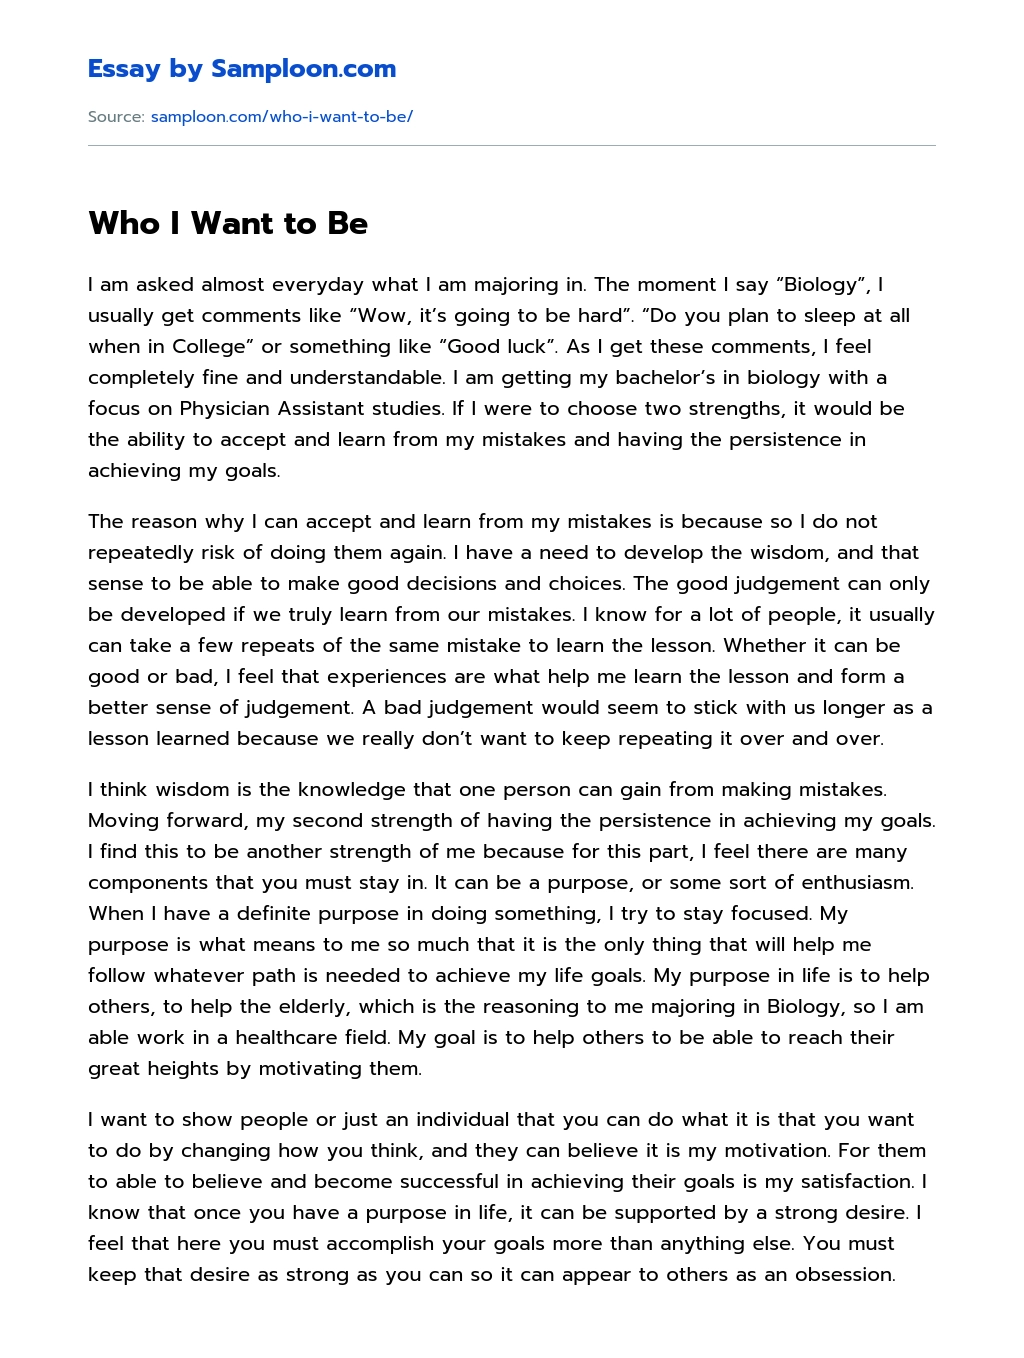 Who I Want to Be Review essay